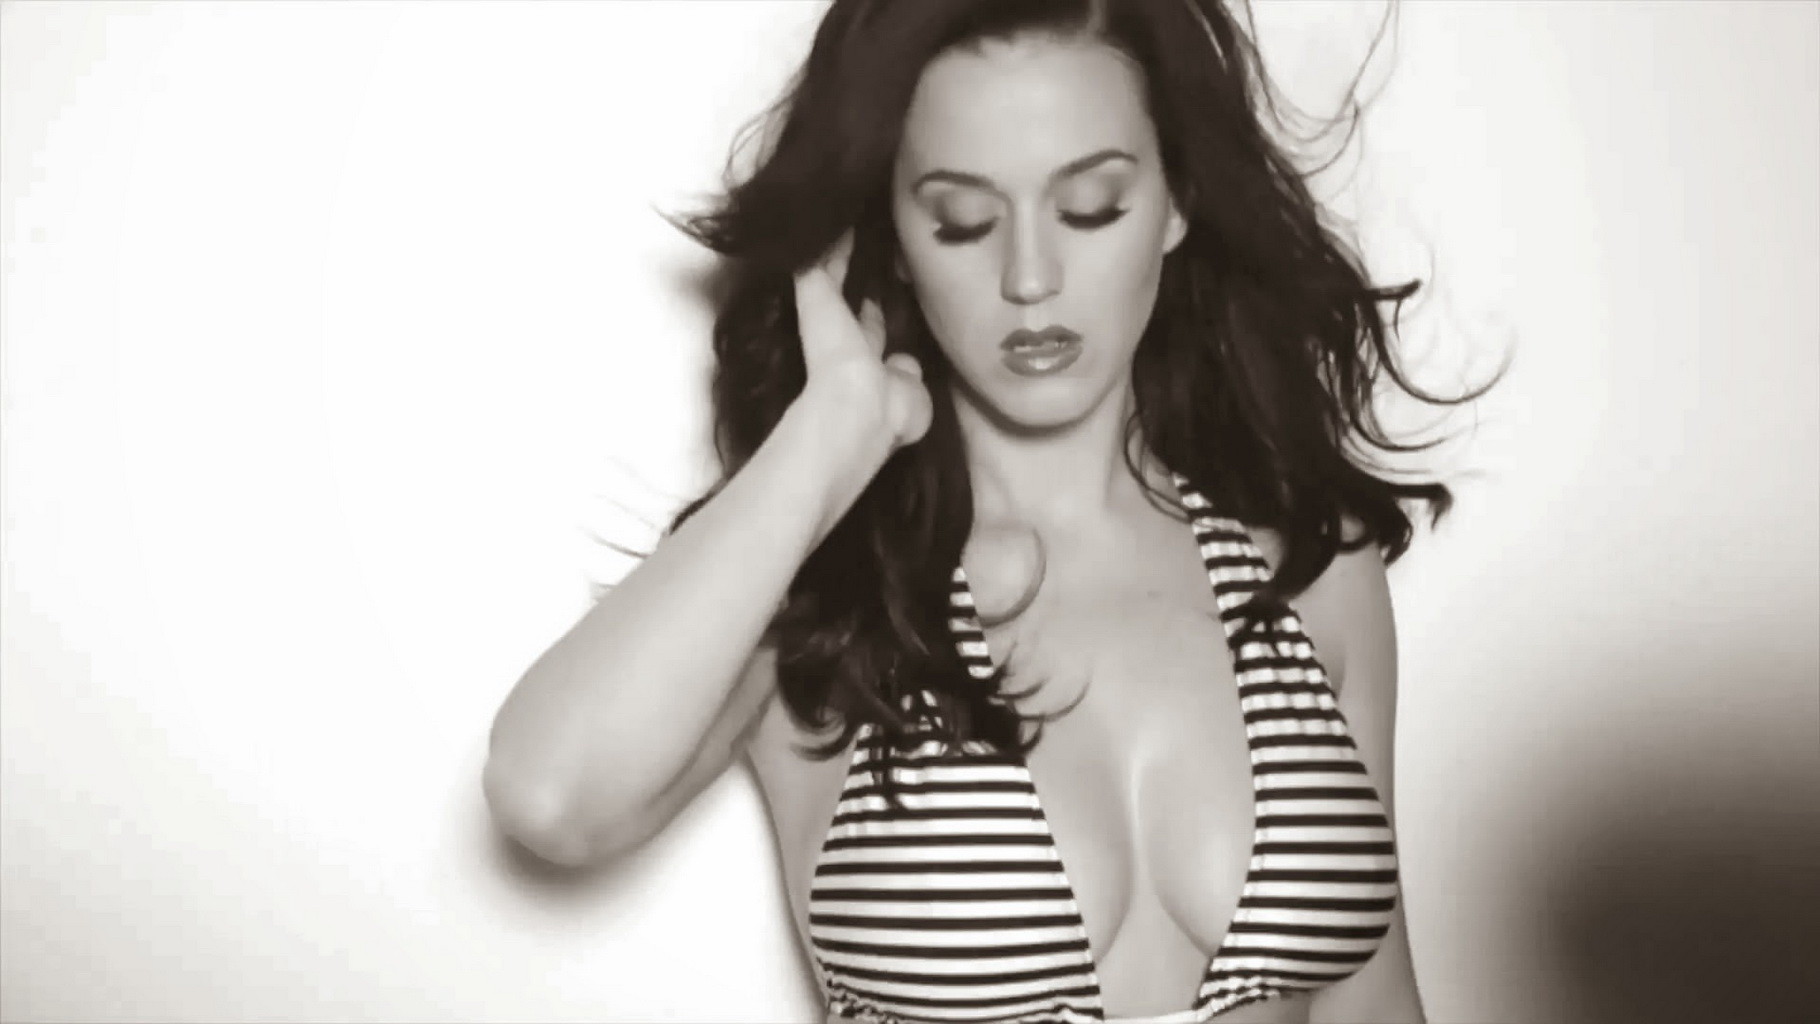 Katy Perry showing off her hot body in lingerie for GQ Magazine 2014 February is #75206658